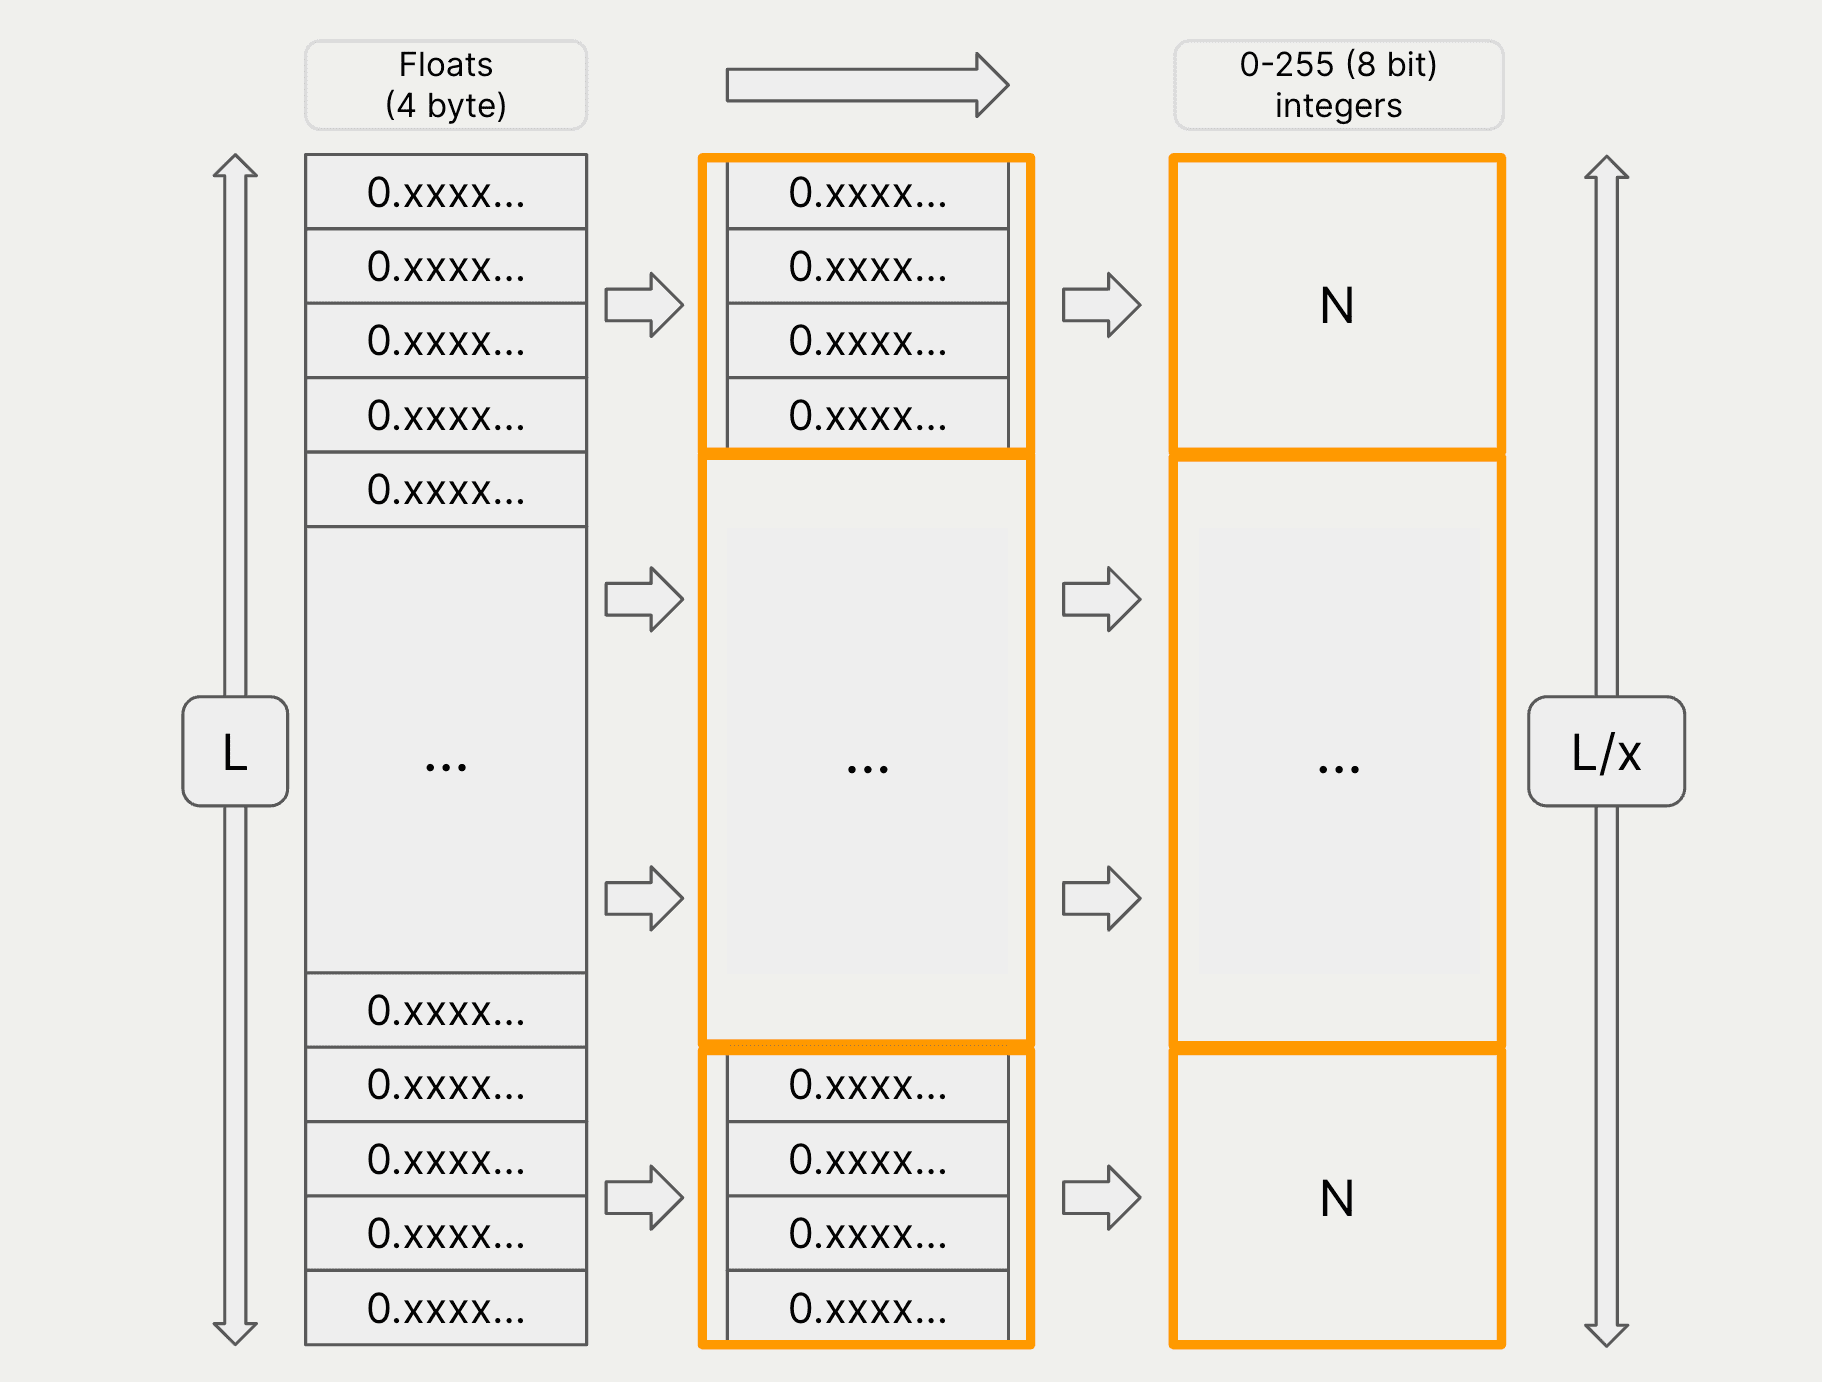 Abstracted PQ diagram showing reduction of dimensions and quantization of groups of floats